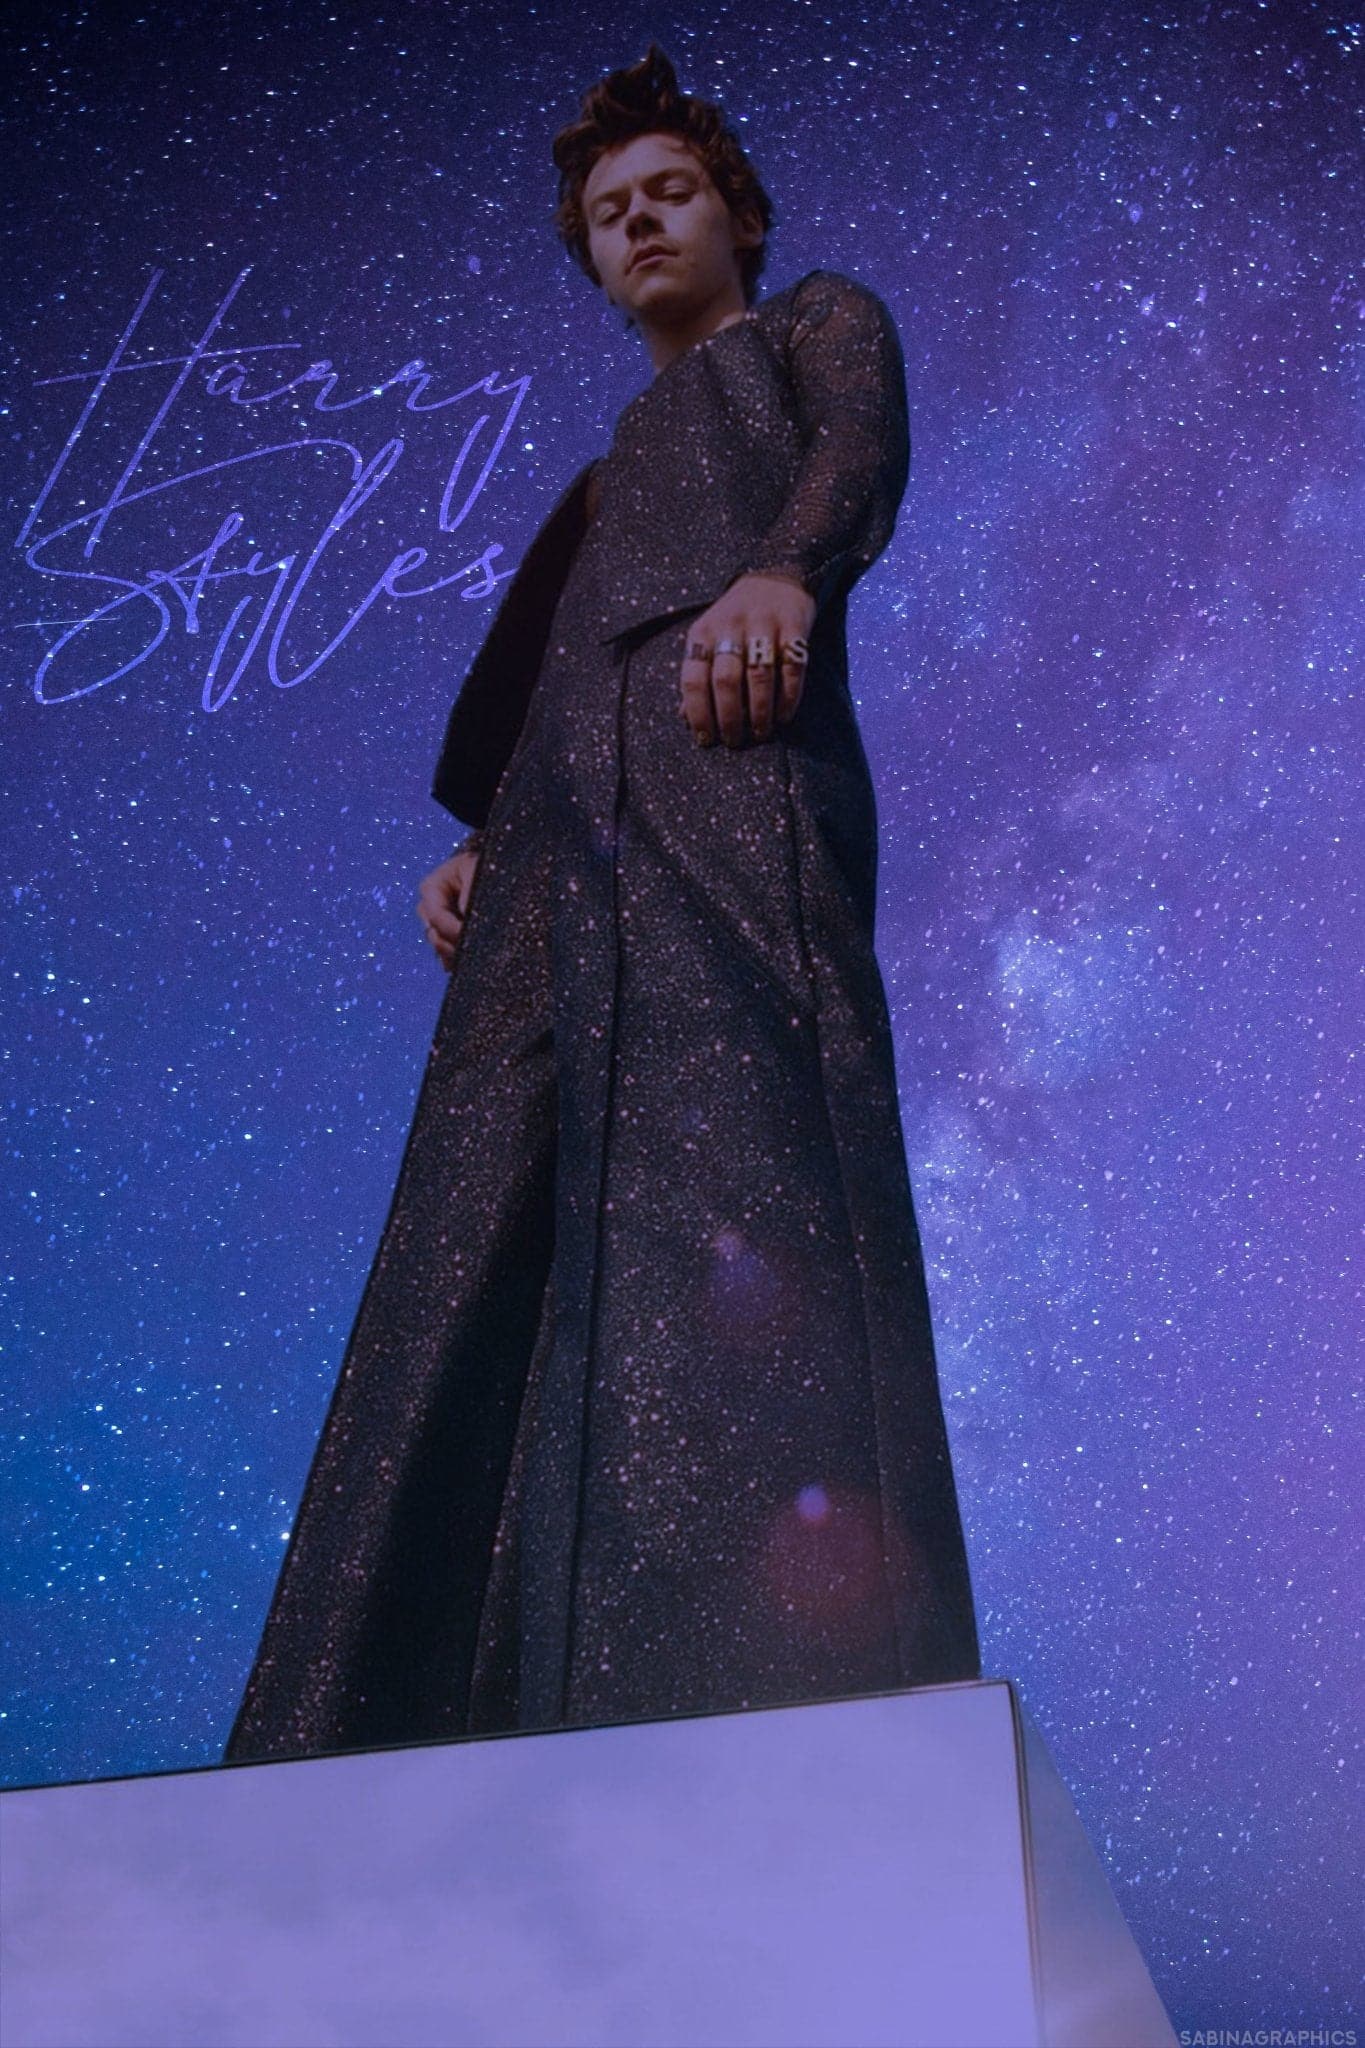 Harry Styles ‘To The Stars’ Poster - Posters Plug